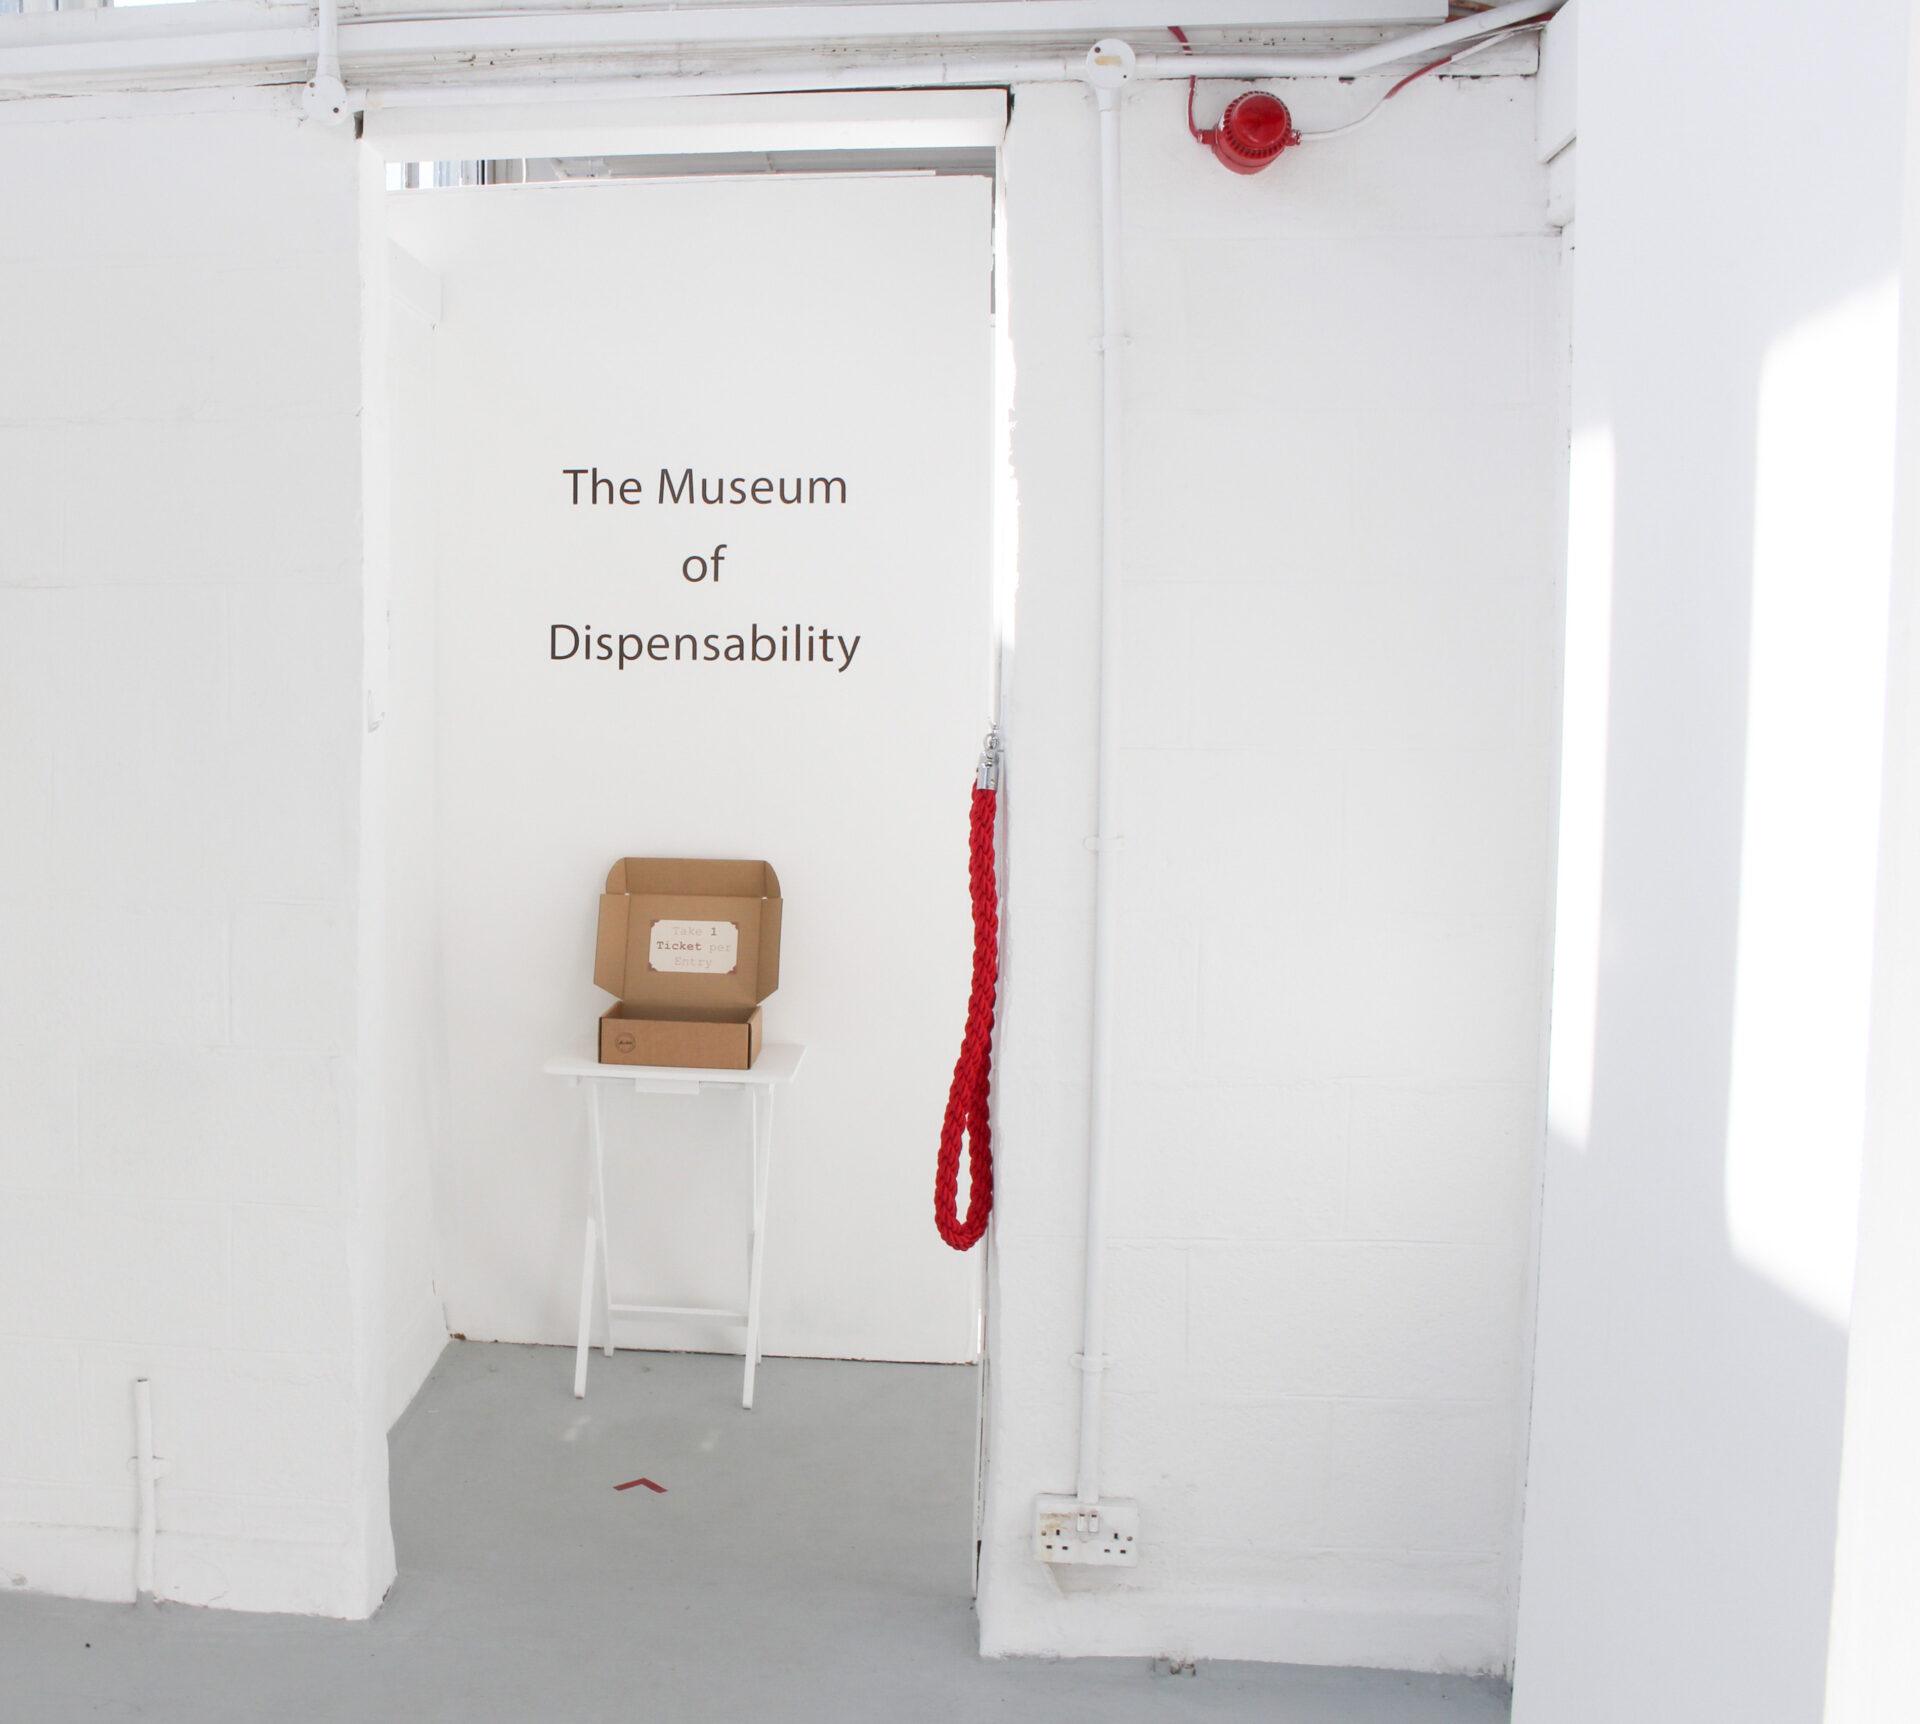 A white door frame with a red rope on the right, featuring vinyl text with the words 'The Museum of Dispensability' on the wall above a brown box on a white table.